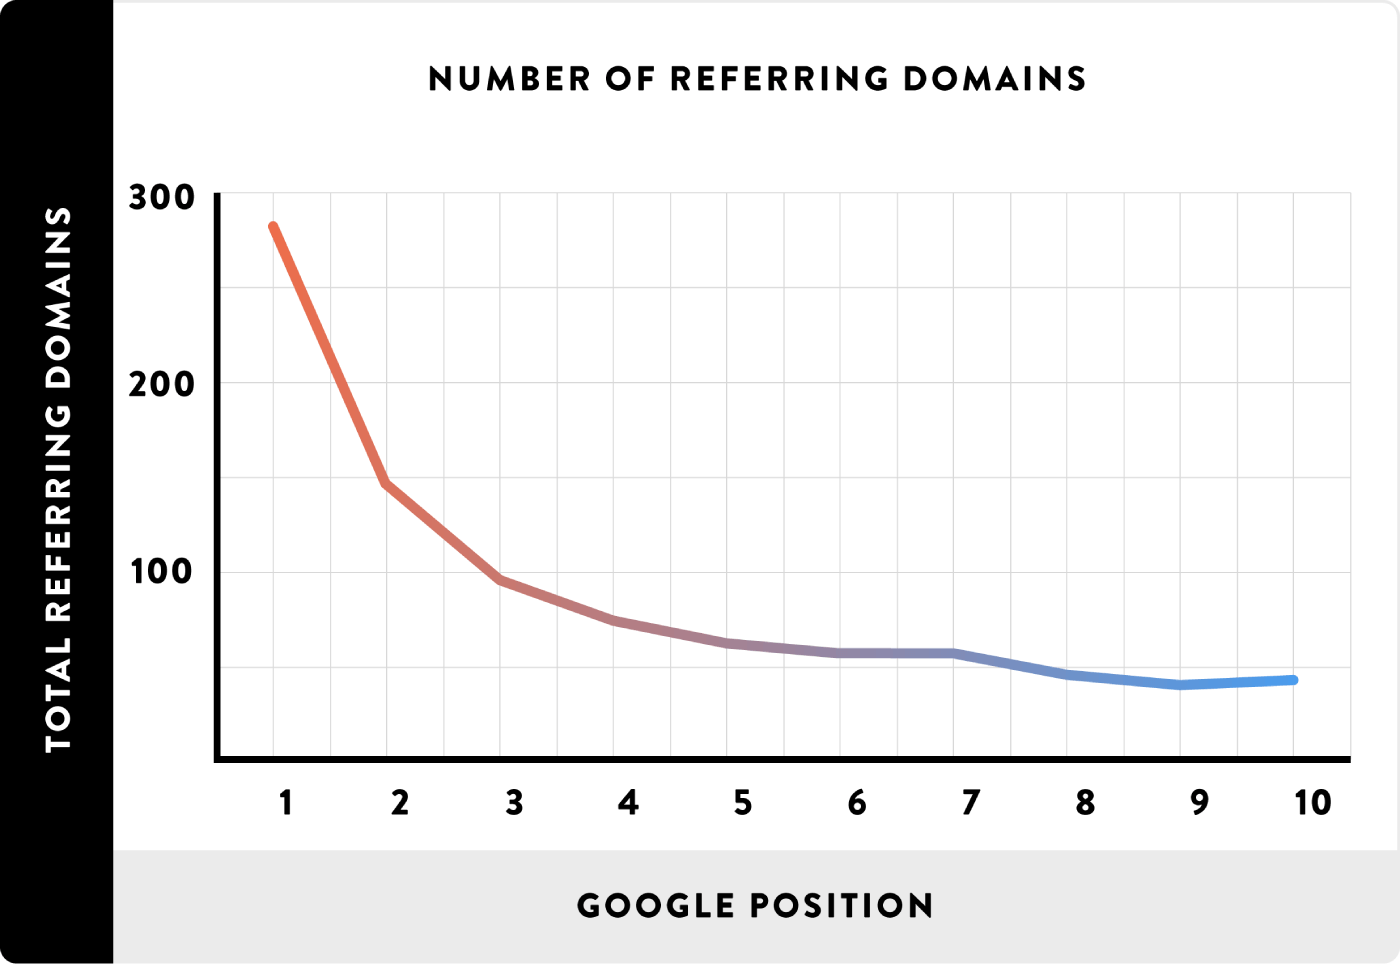 Number of referring domains